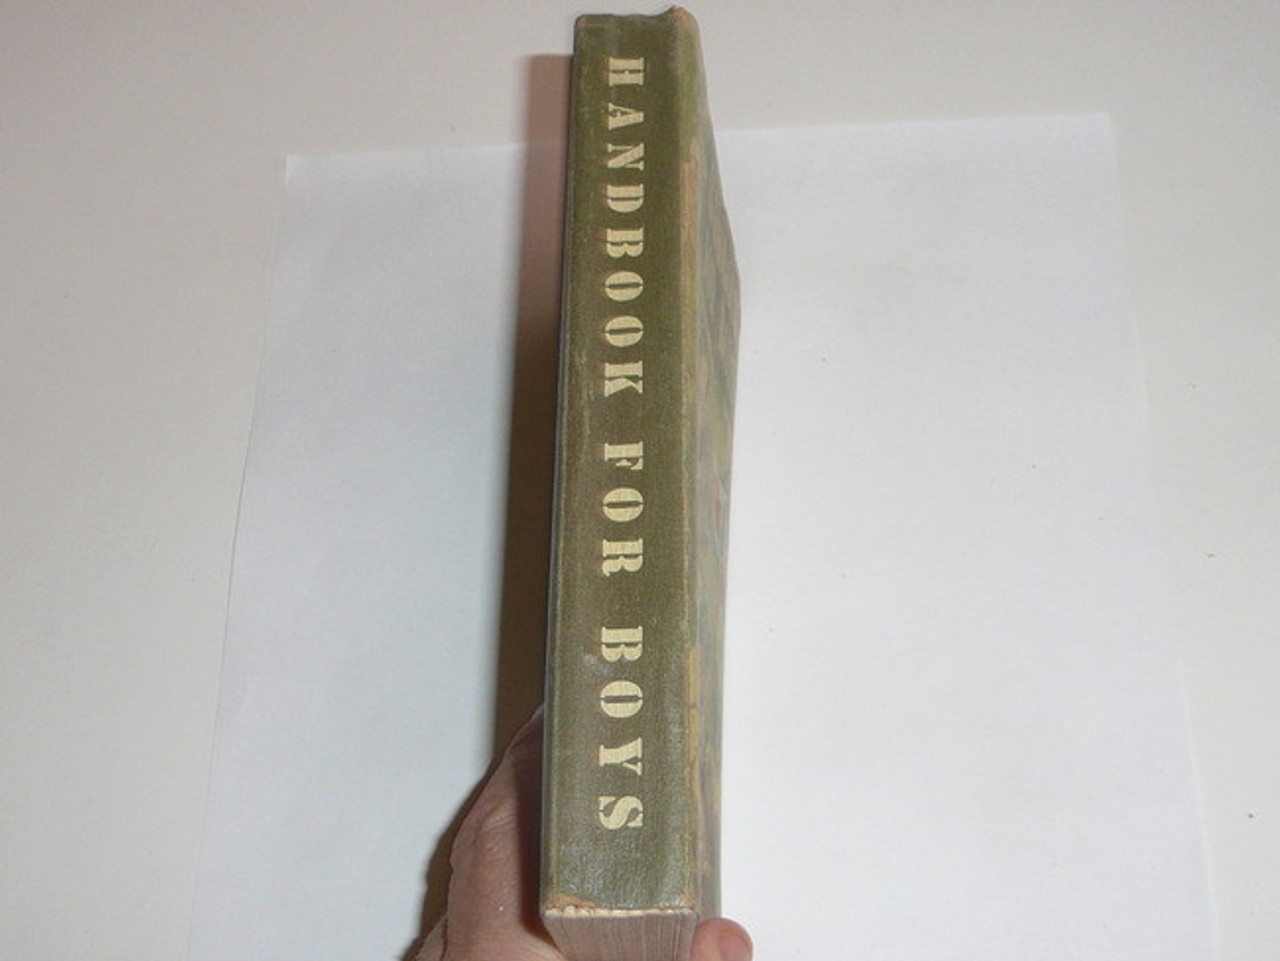 1948 Boy Scout Handbook, Fifth Edition, First Printing, Don Ross Cover Artwork, MINT Condition